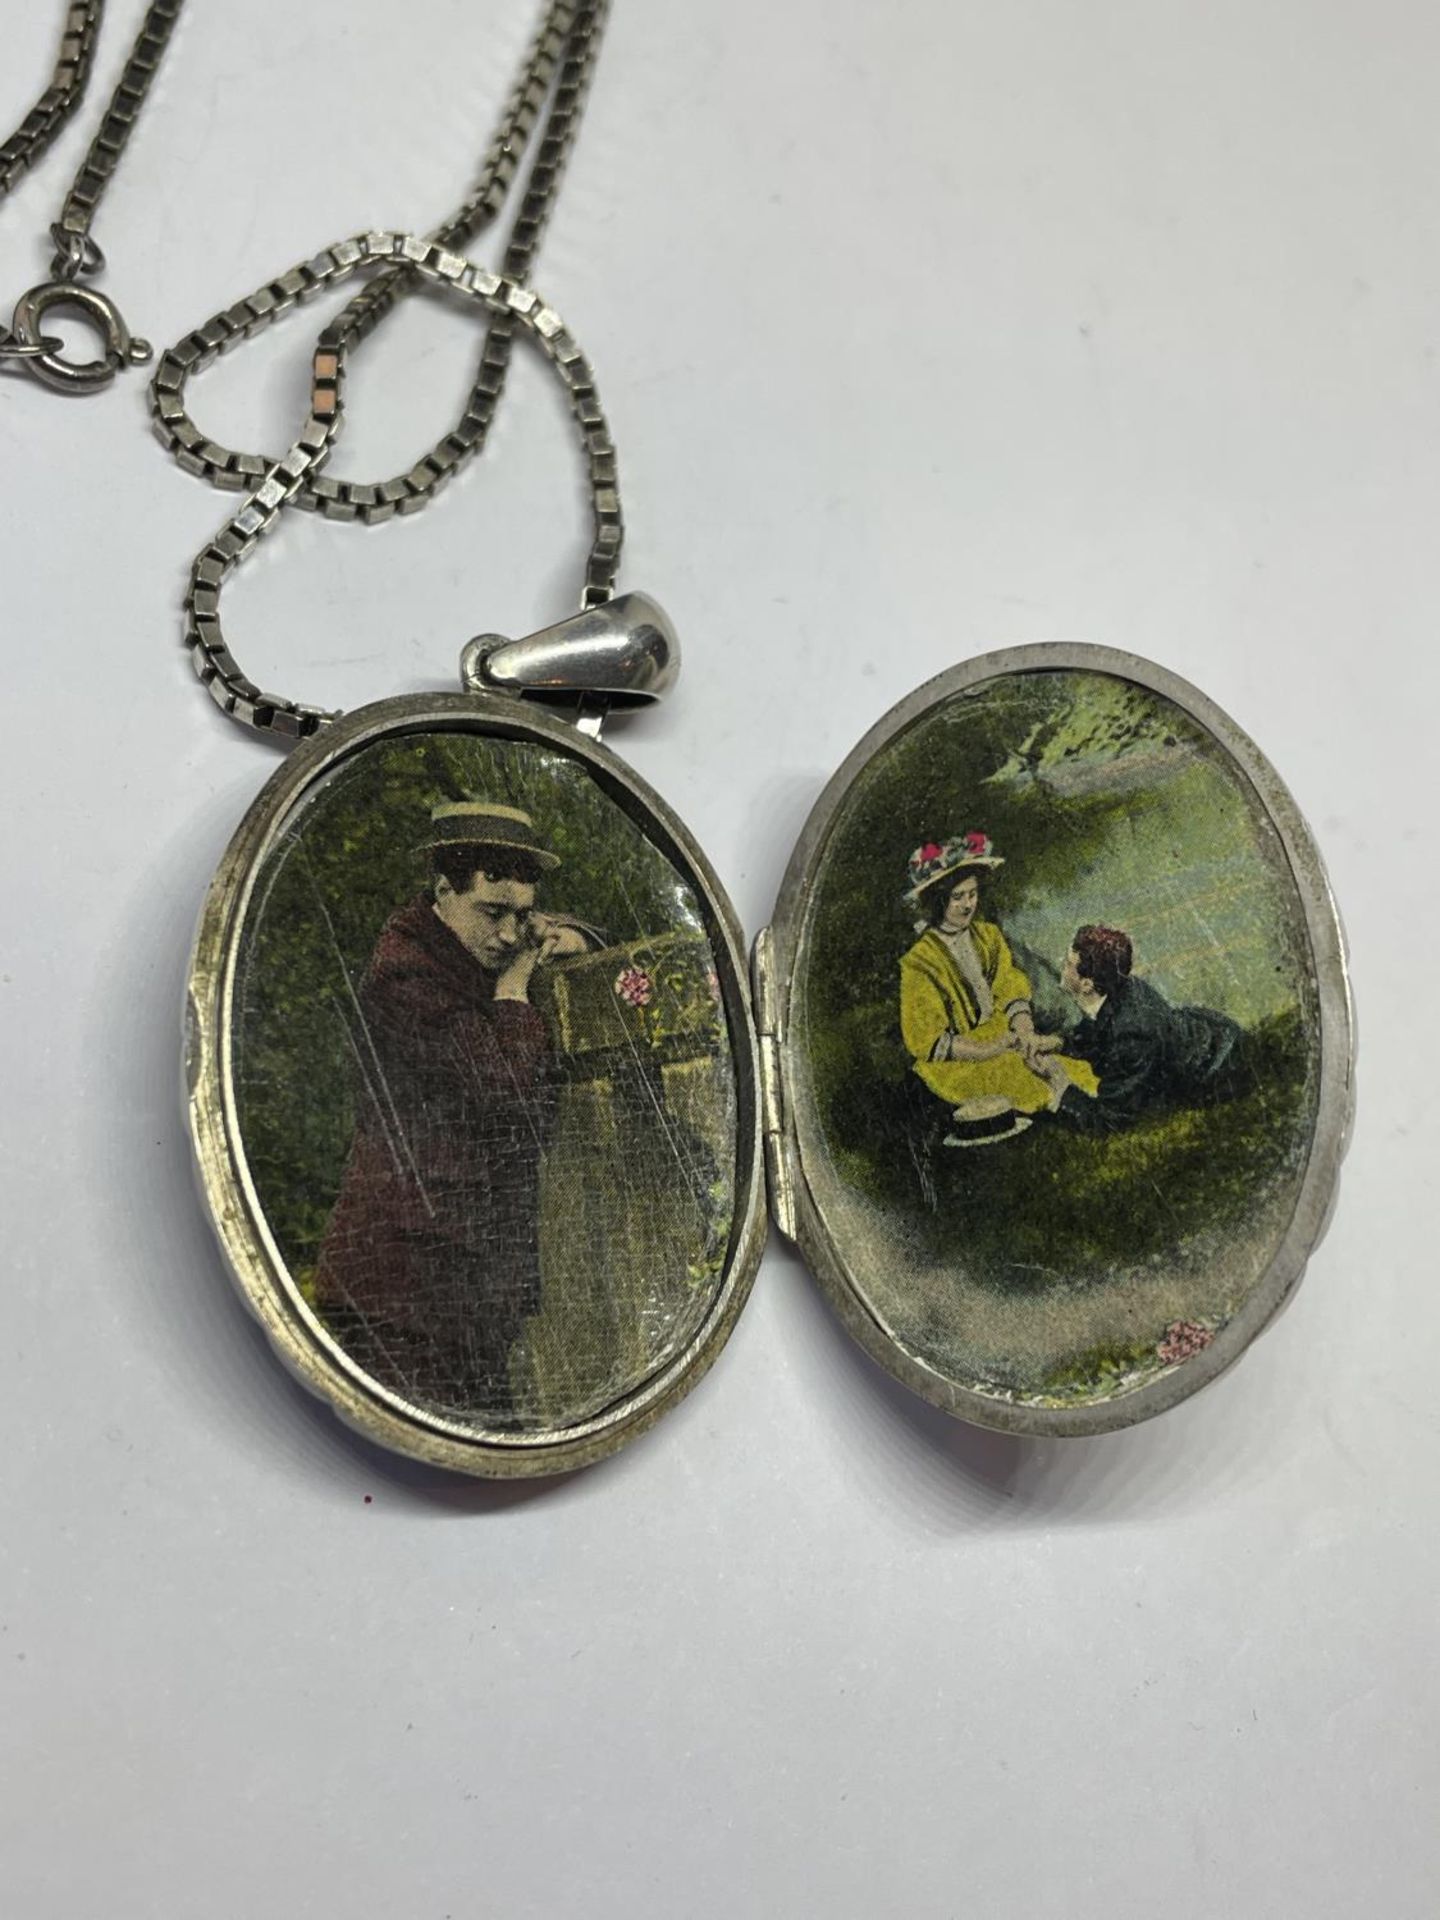 A WWI SILVER LOCKET AND CHAIN - Image 4 of 4